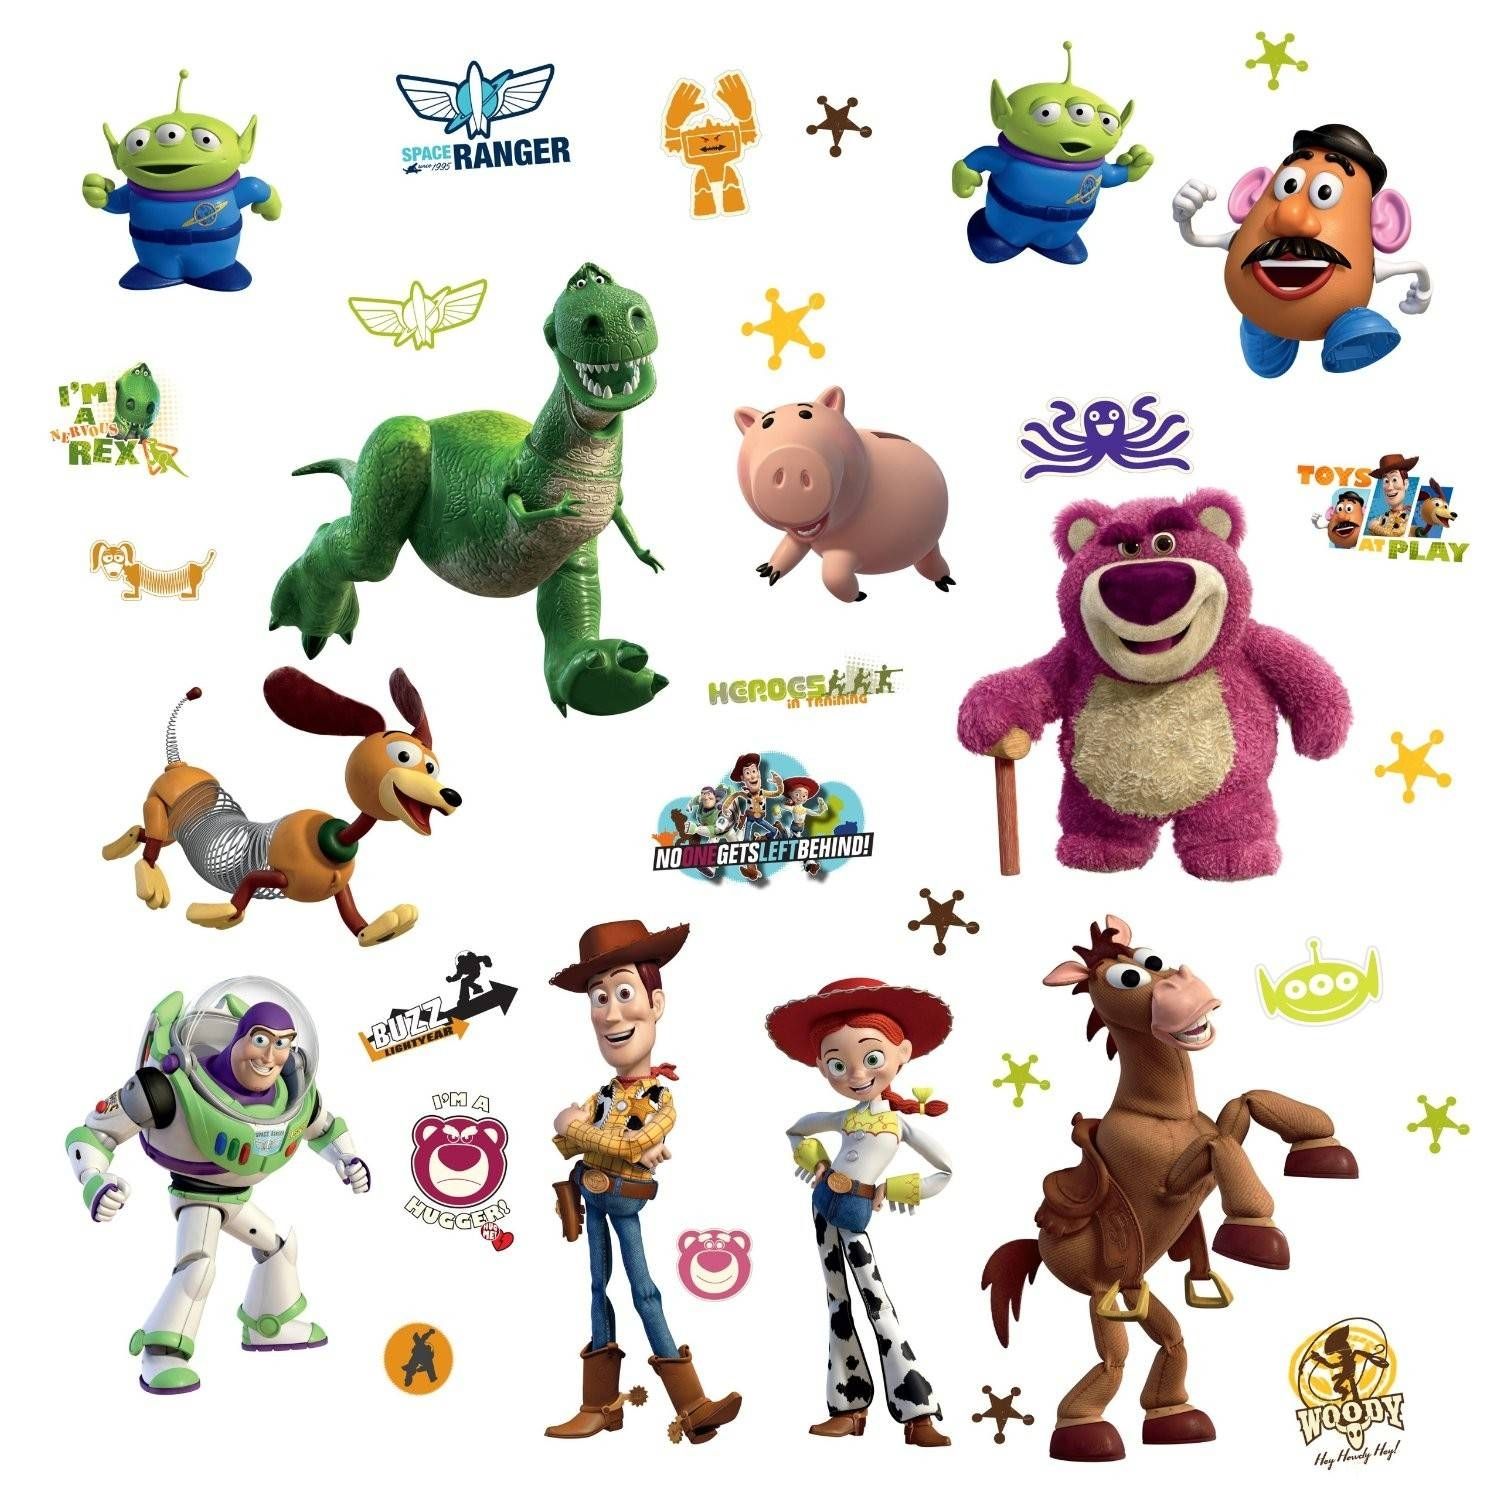 Toy Story 3 Glow In The Dark Wall Decals Regarding Most Popular Toy Story Wall Stickers (View 20 of 25)